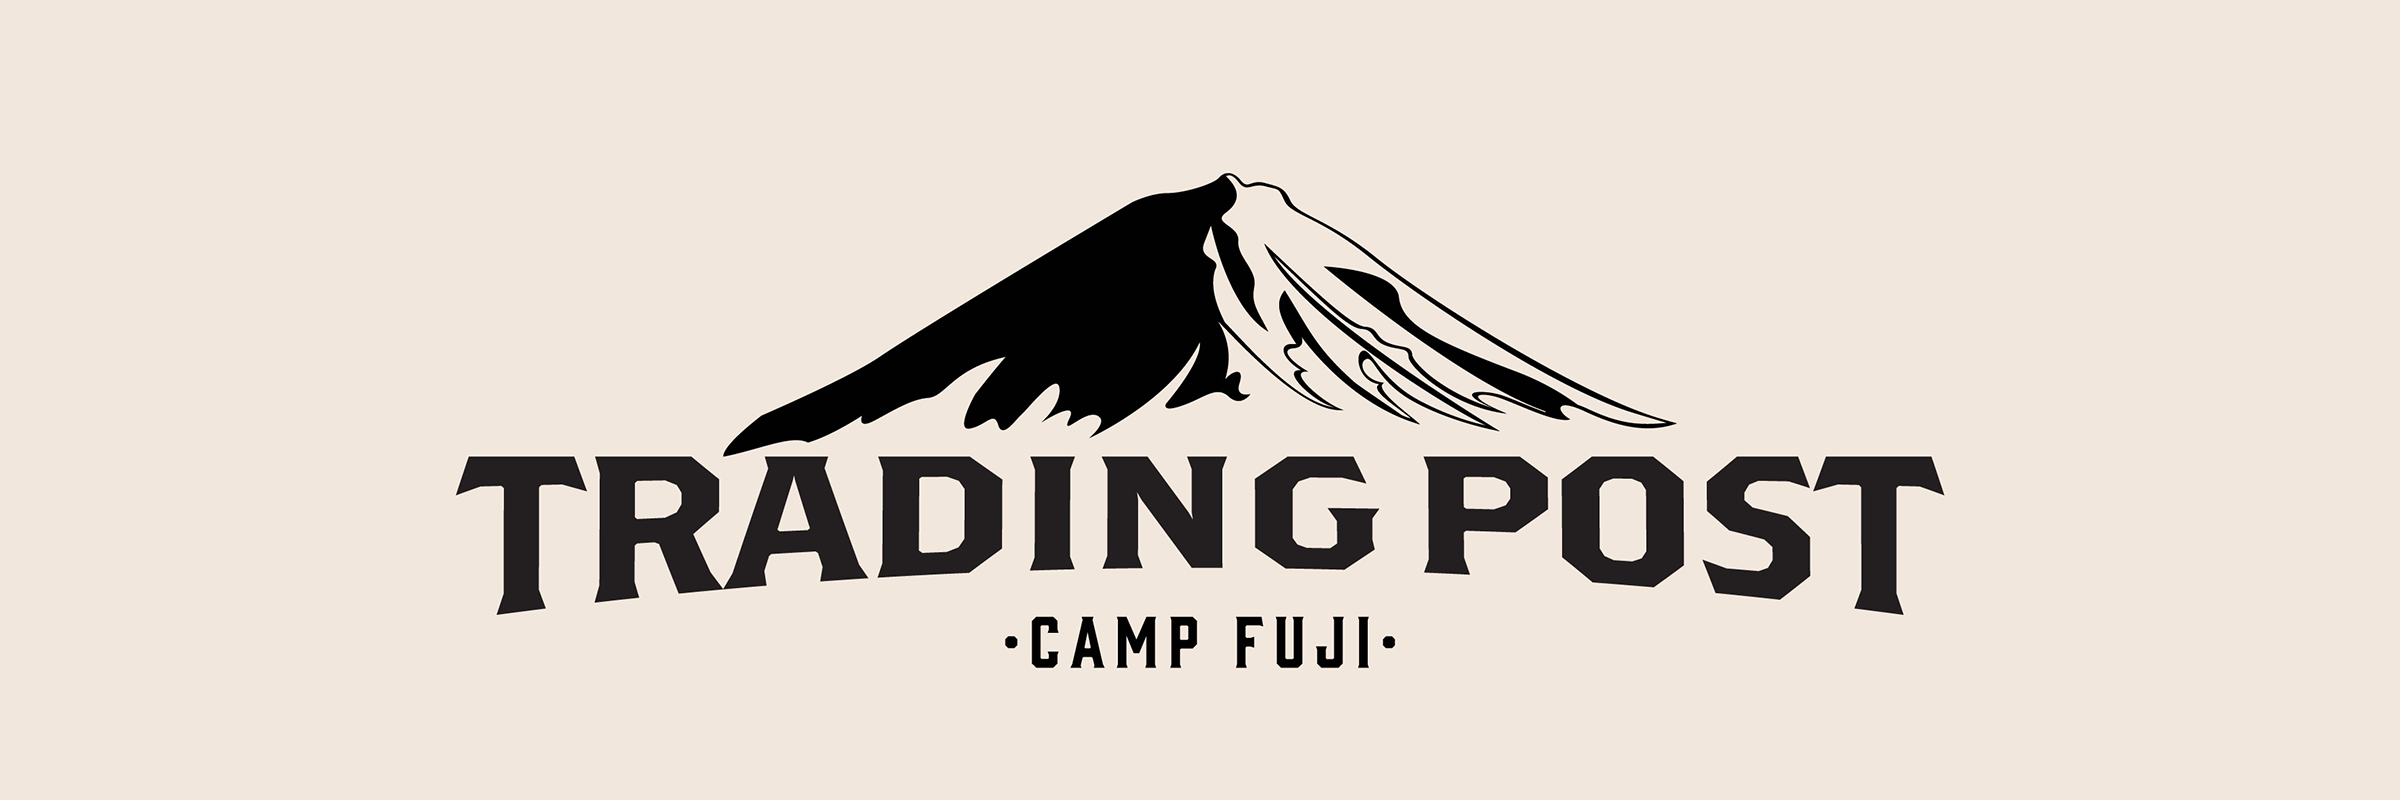 TradingPost Banner-01.2400x800.png